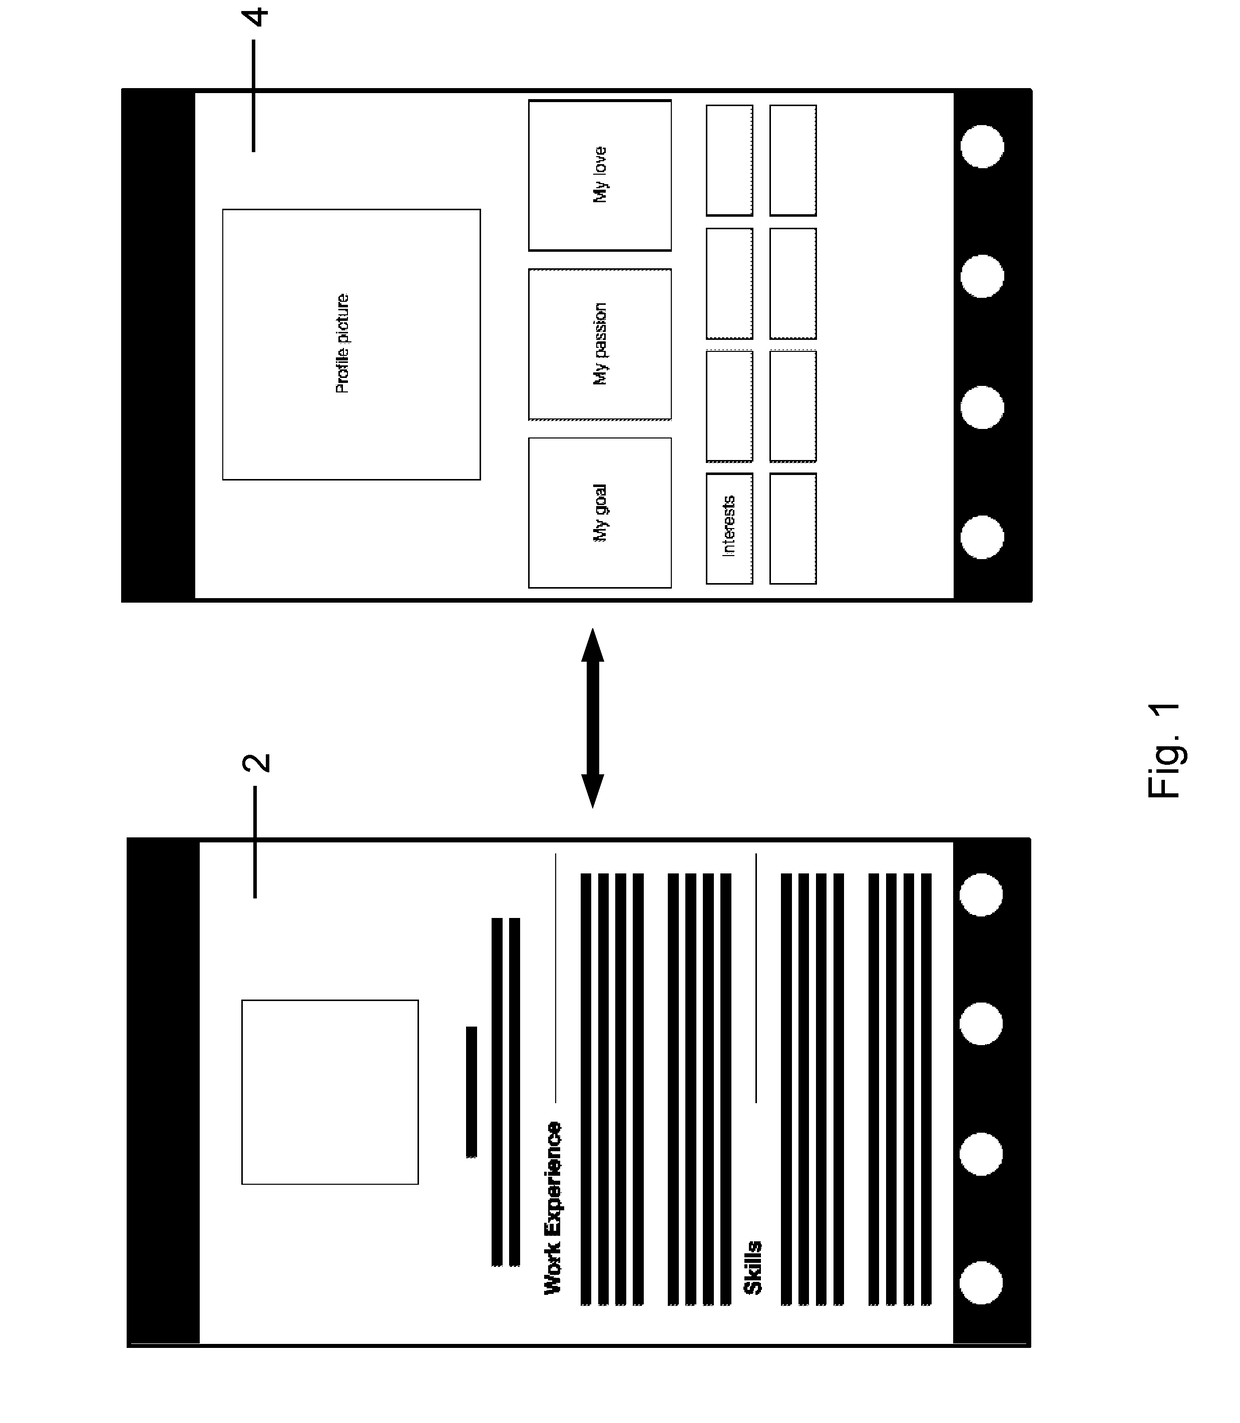 Platform for digital business cards that facilitates connections between individuals and a method thereof